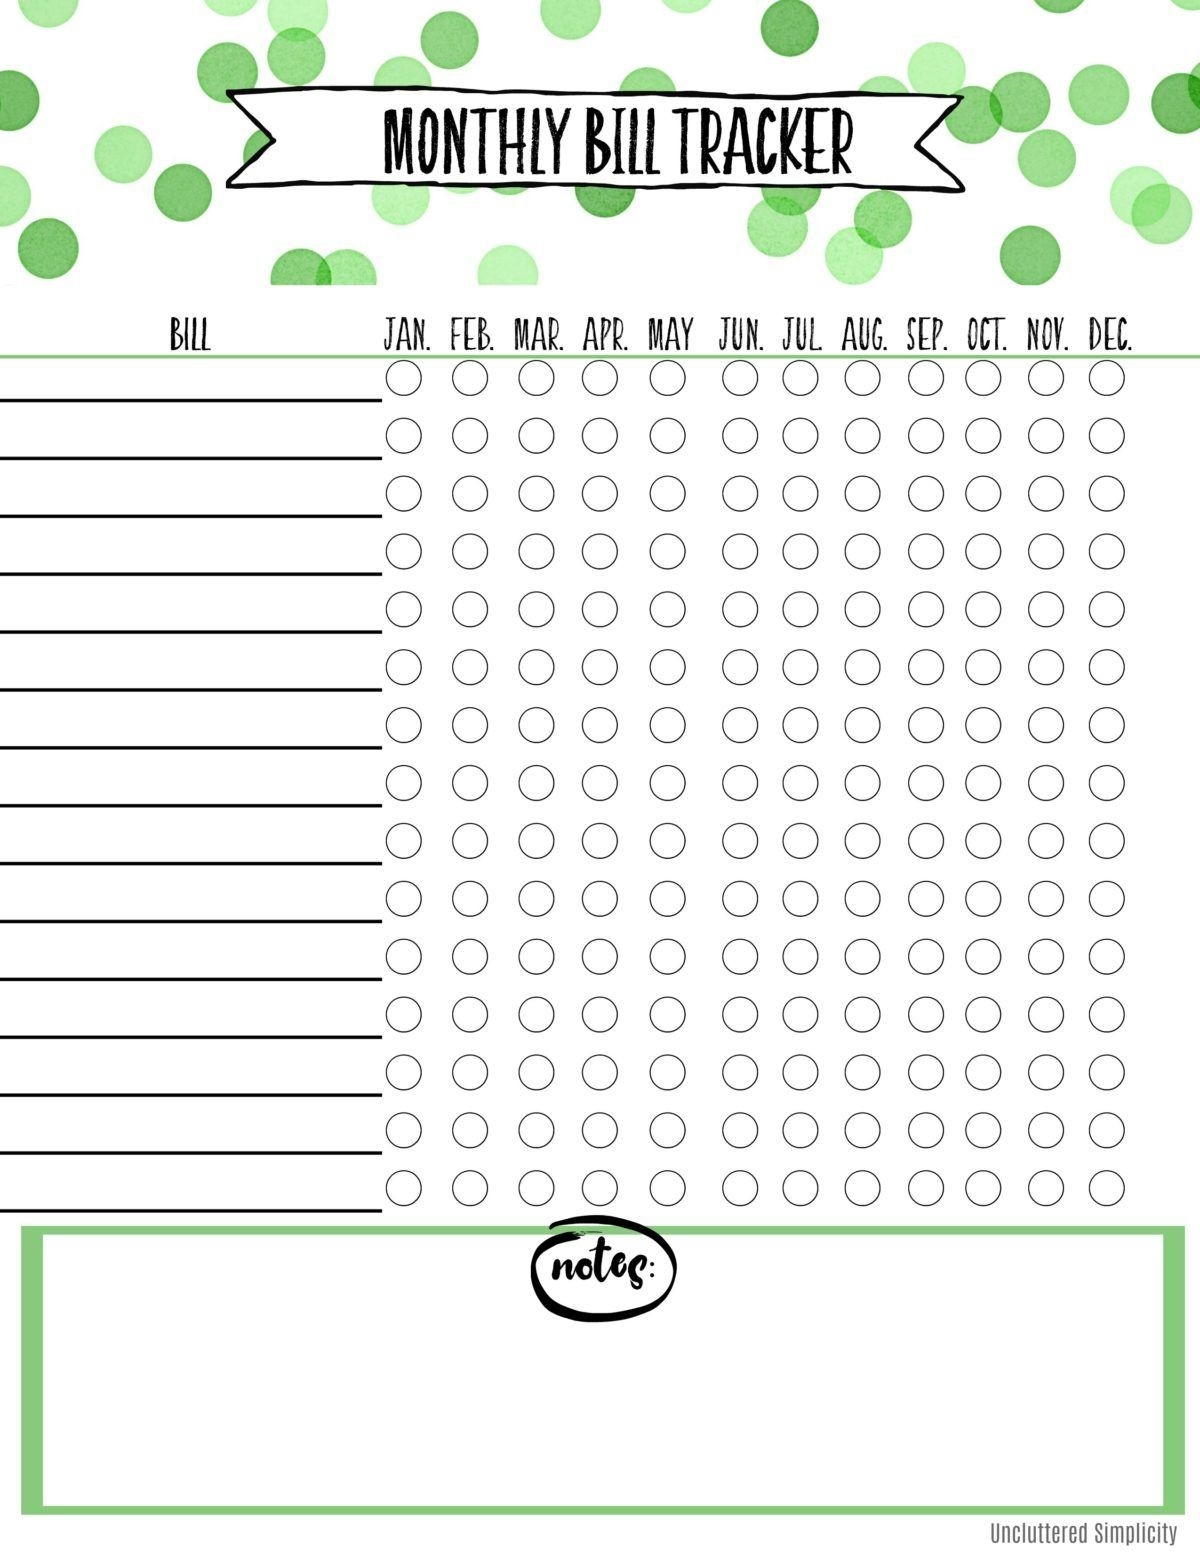 Free Printable Monthly Bill Payment Tracker: Organize Your-Printable Monthly Bill Calendar Free